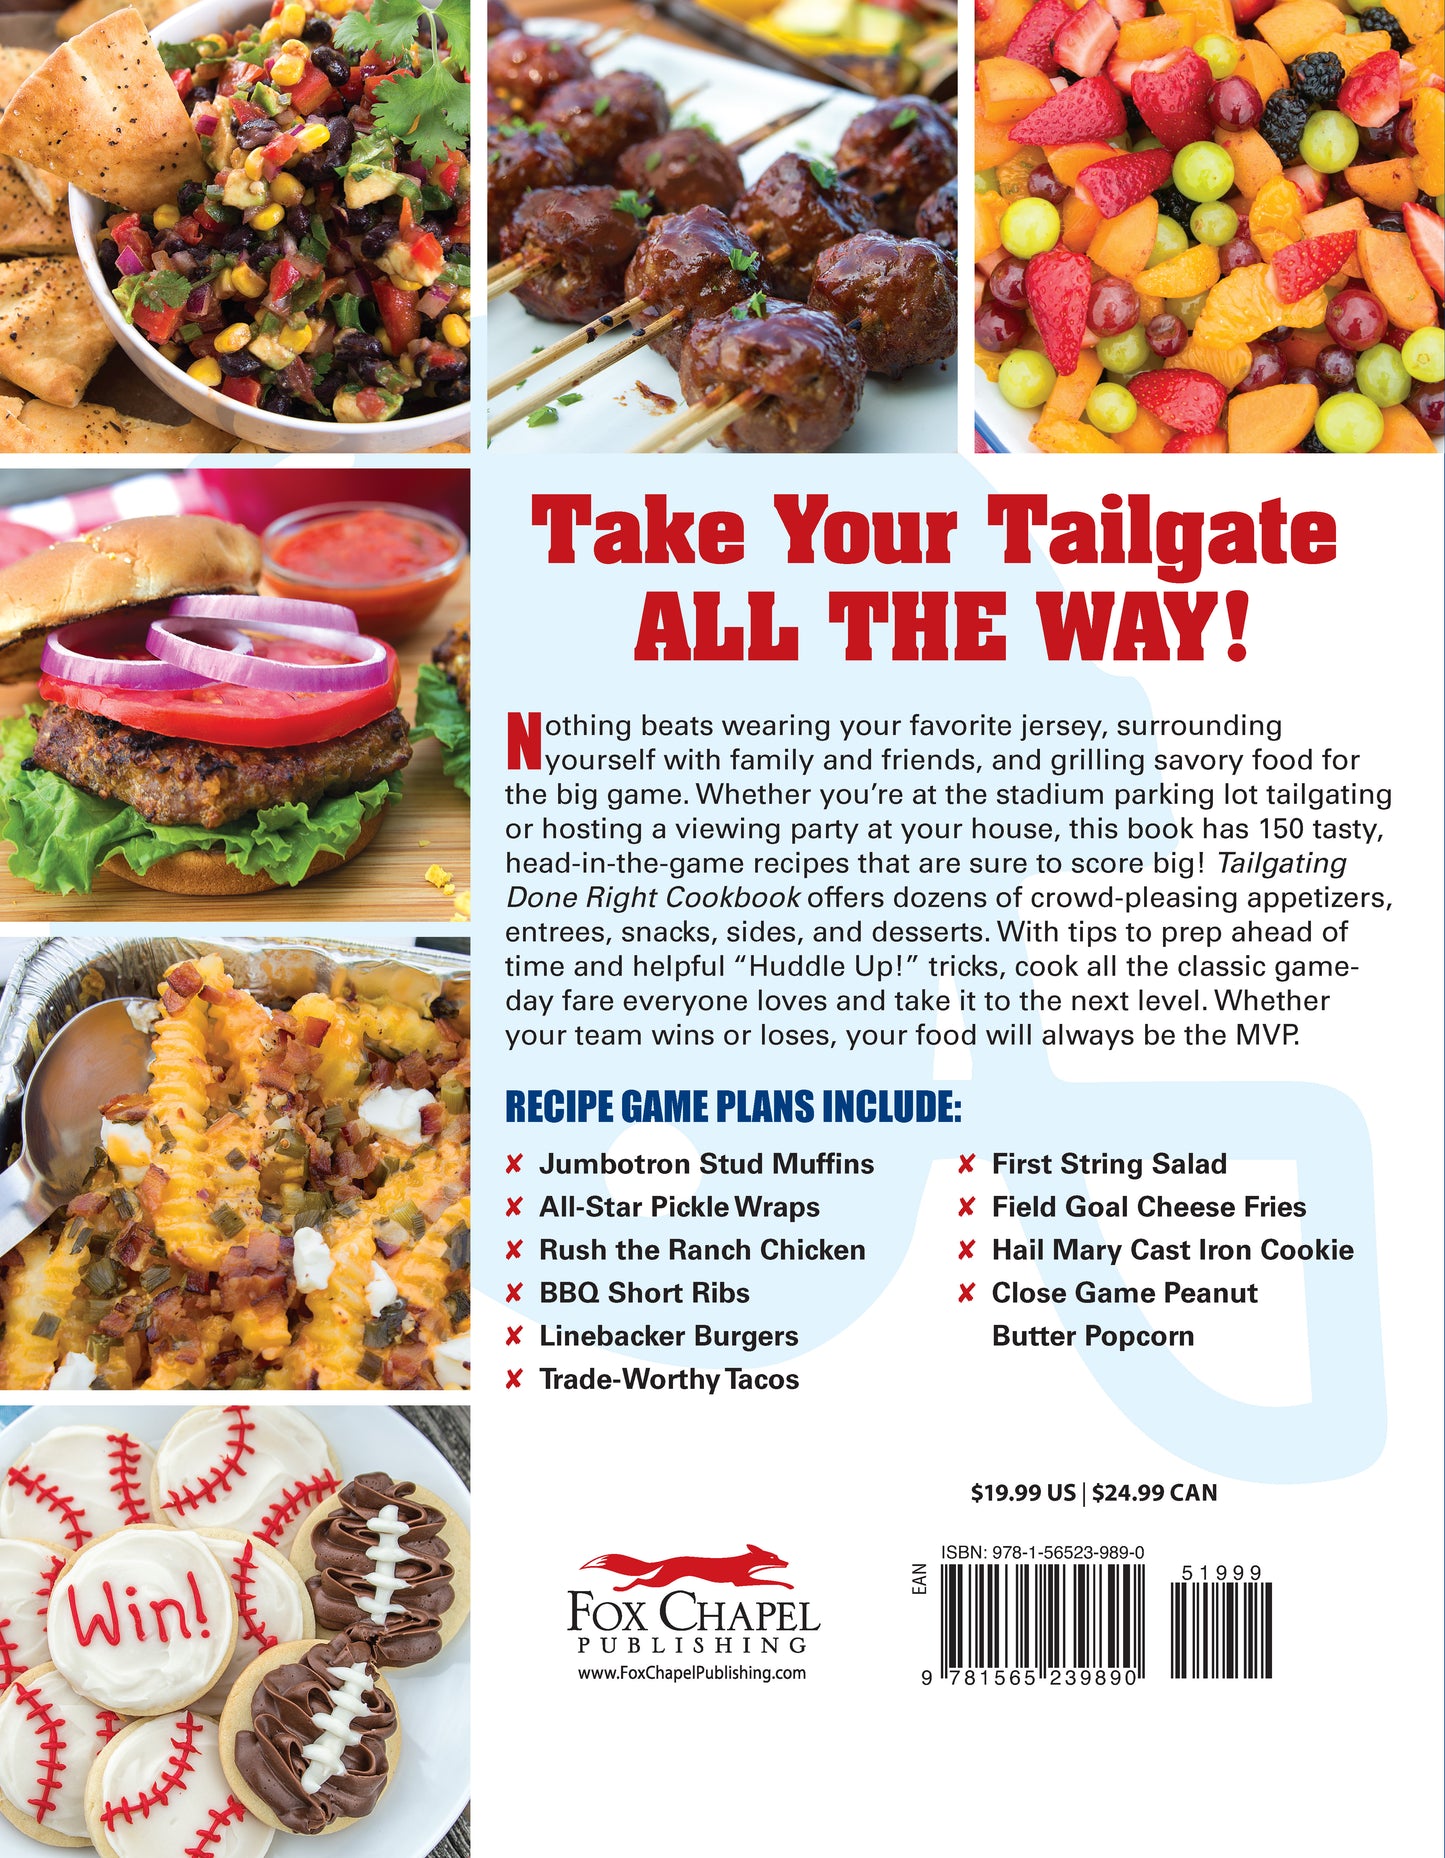 Tailgating Done Right Cookbook